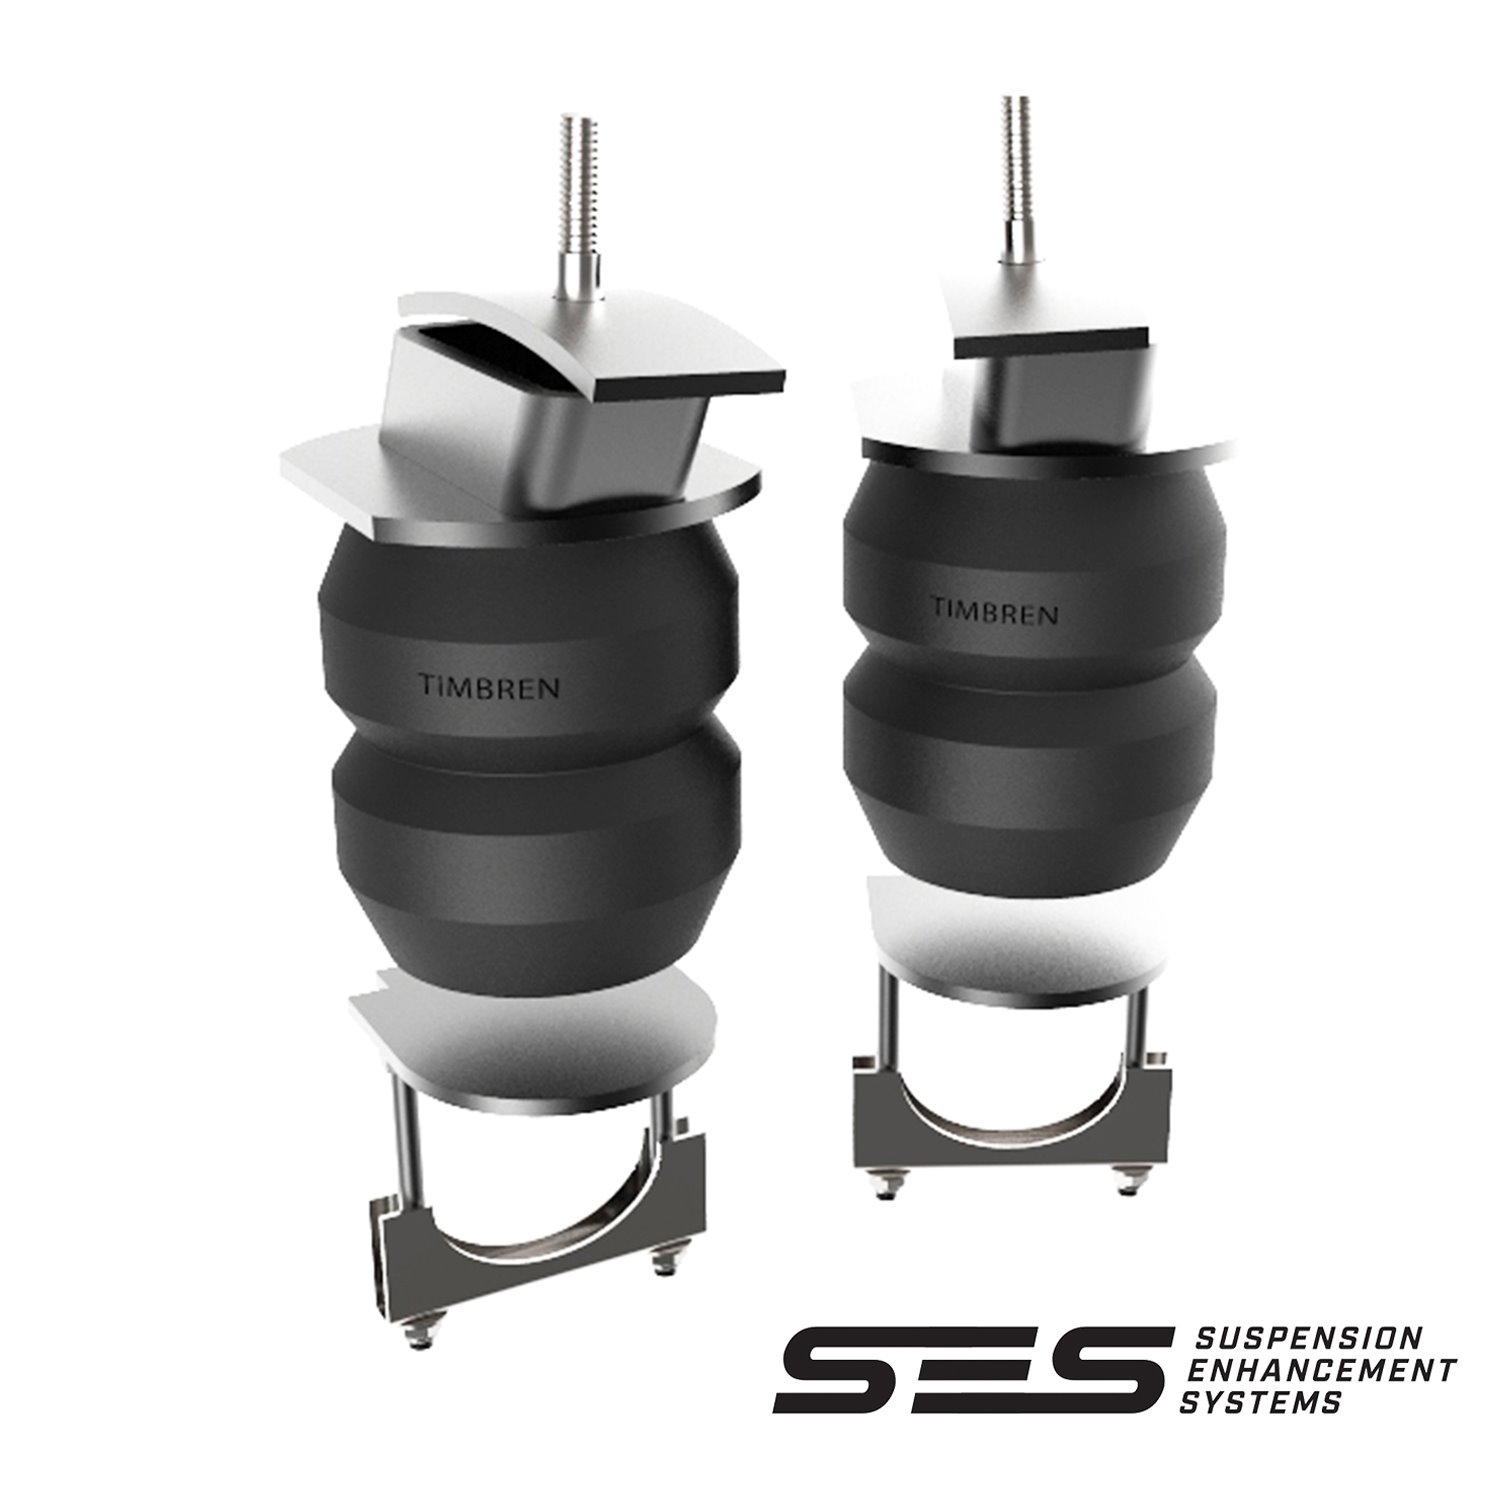 FER35092B SES Suspension Enhancement System Rear Kit Fits Select Ford E-Series [Rated Capacity: 3600 lbs.]